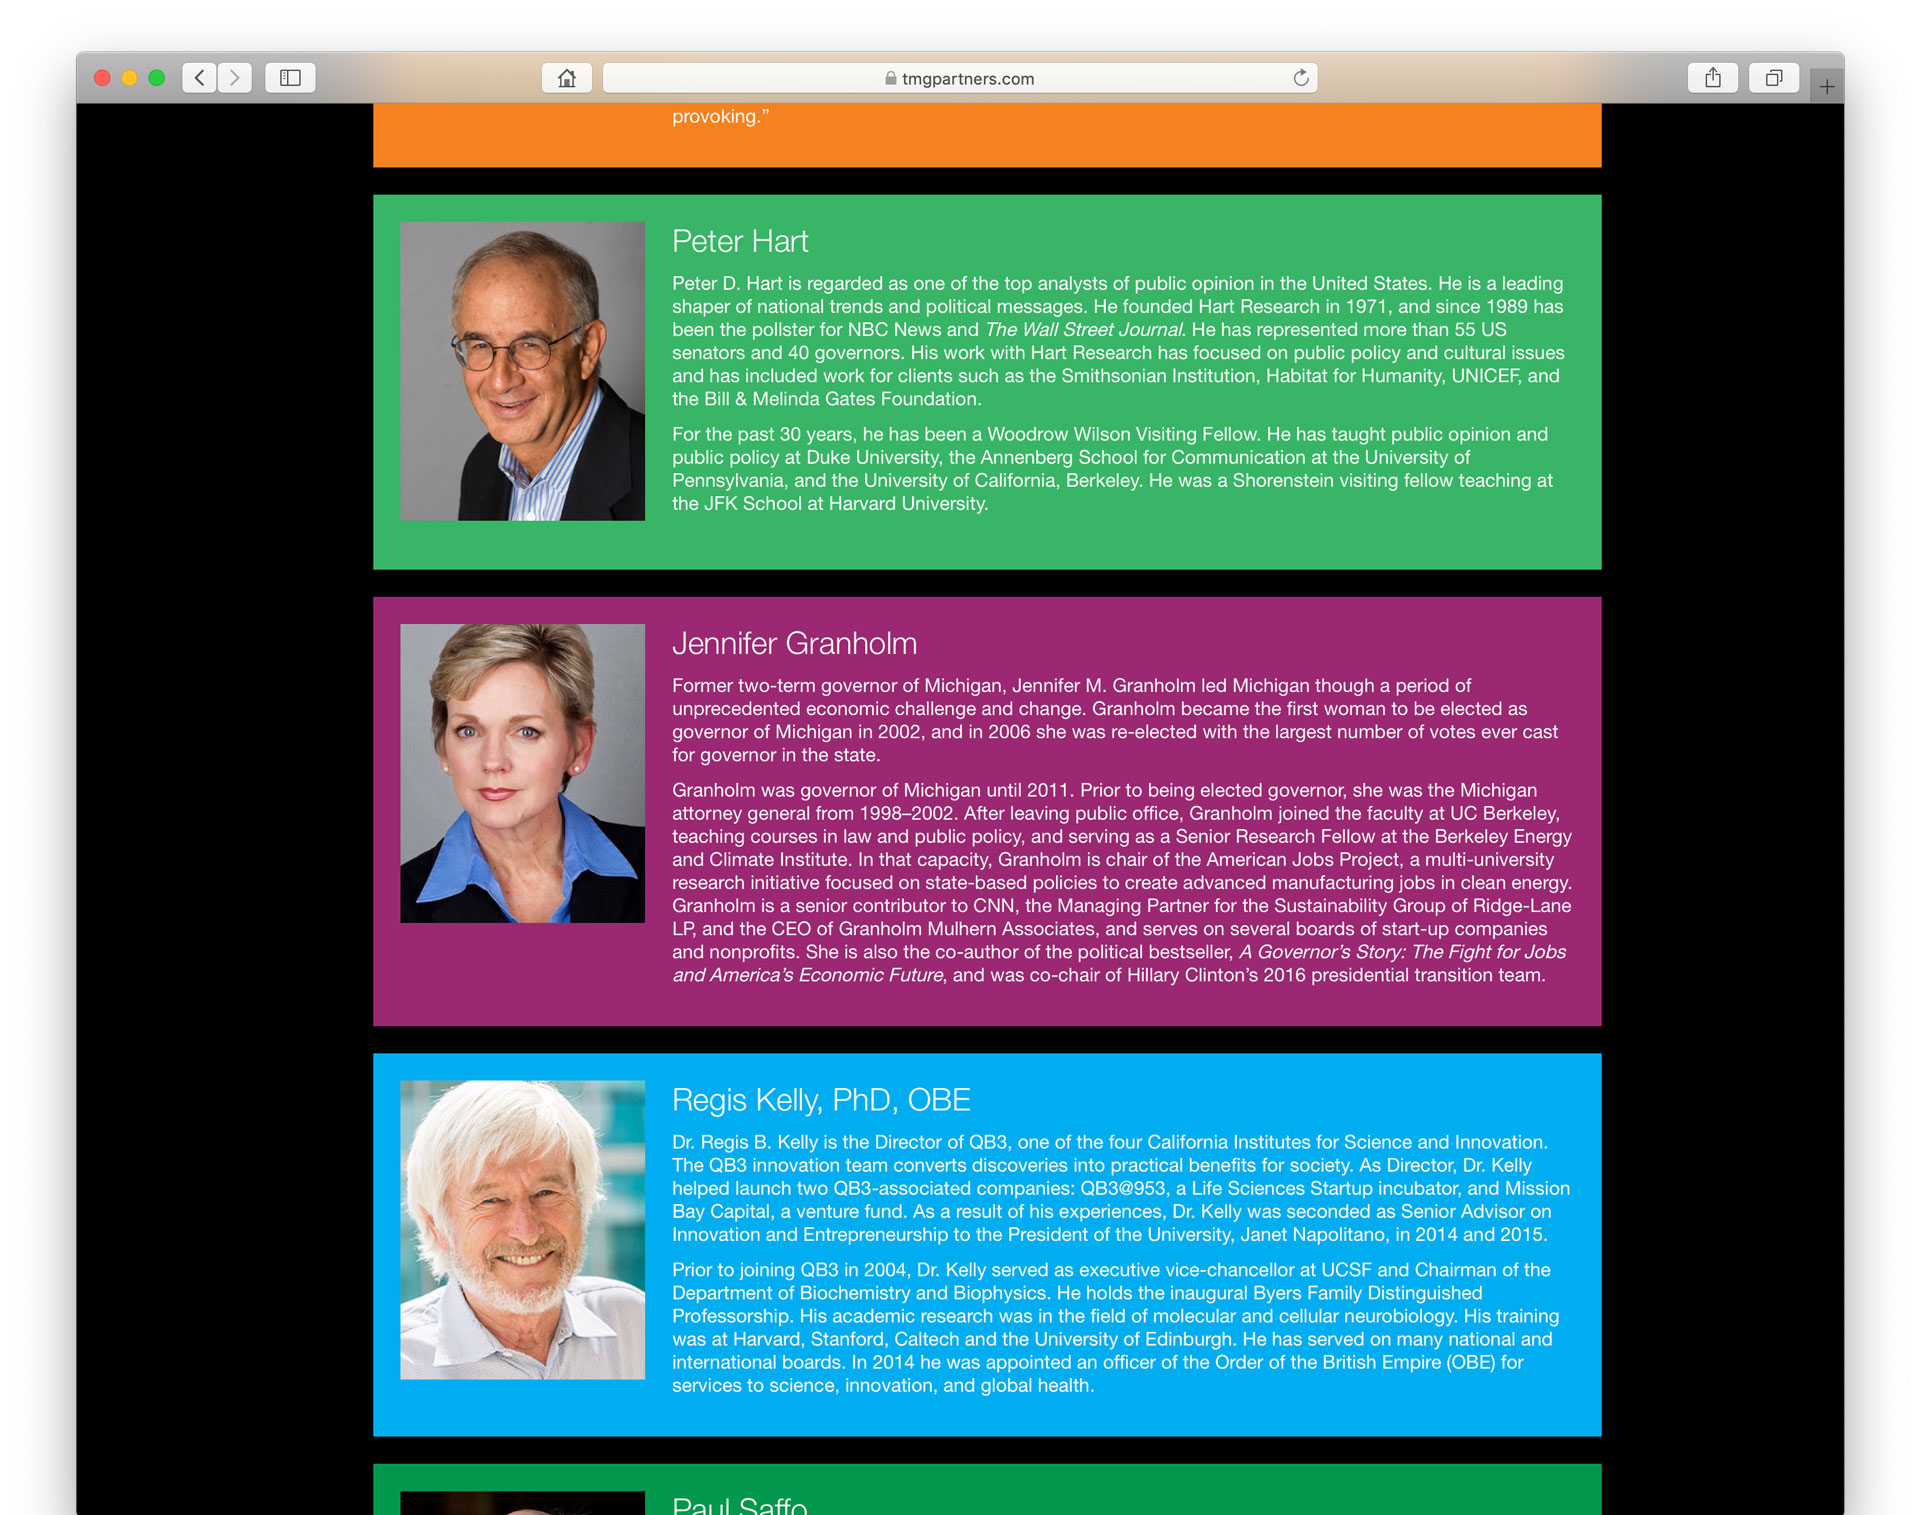 Screenshot of event web page showing speaker biographies.